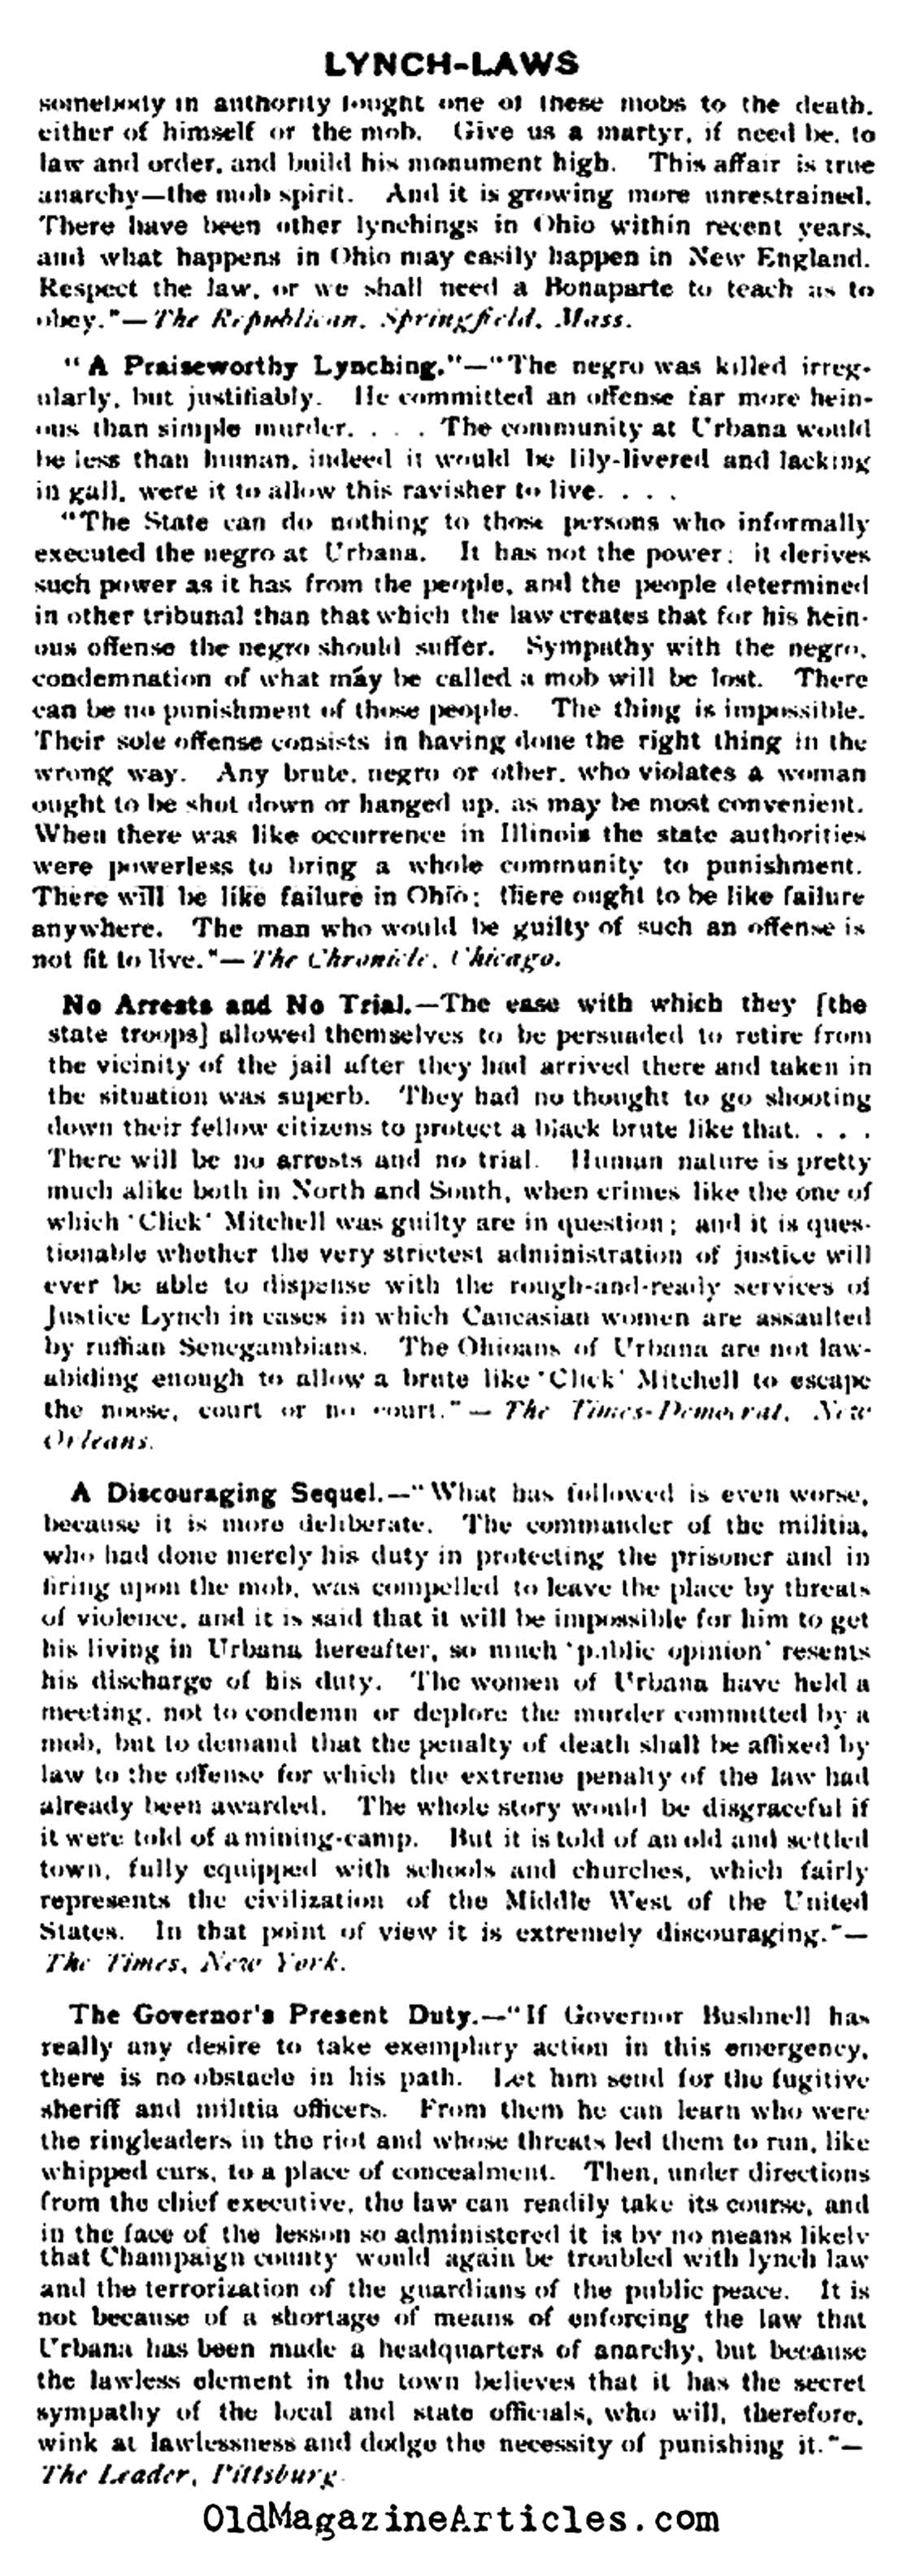 Lynch Mobs in Ohio and Elsewhere (Literary Digest, 1897)